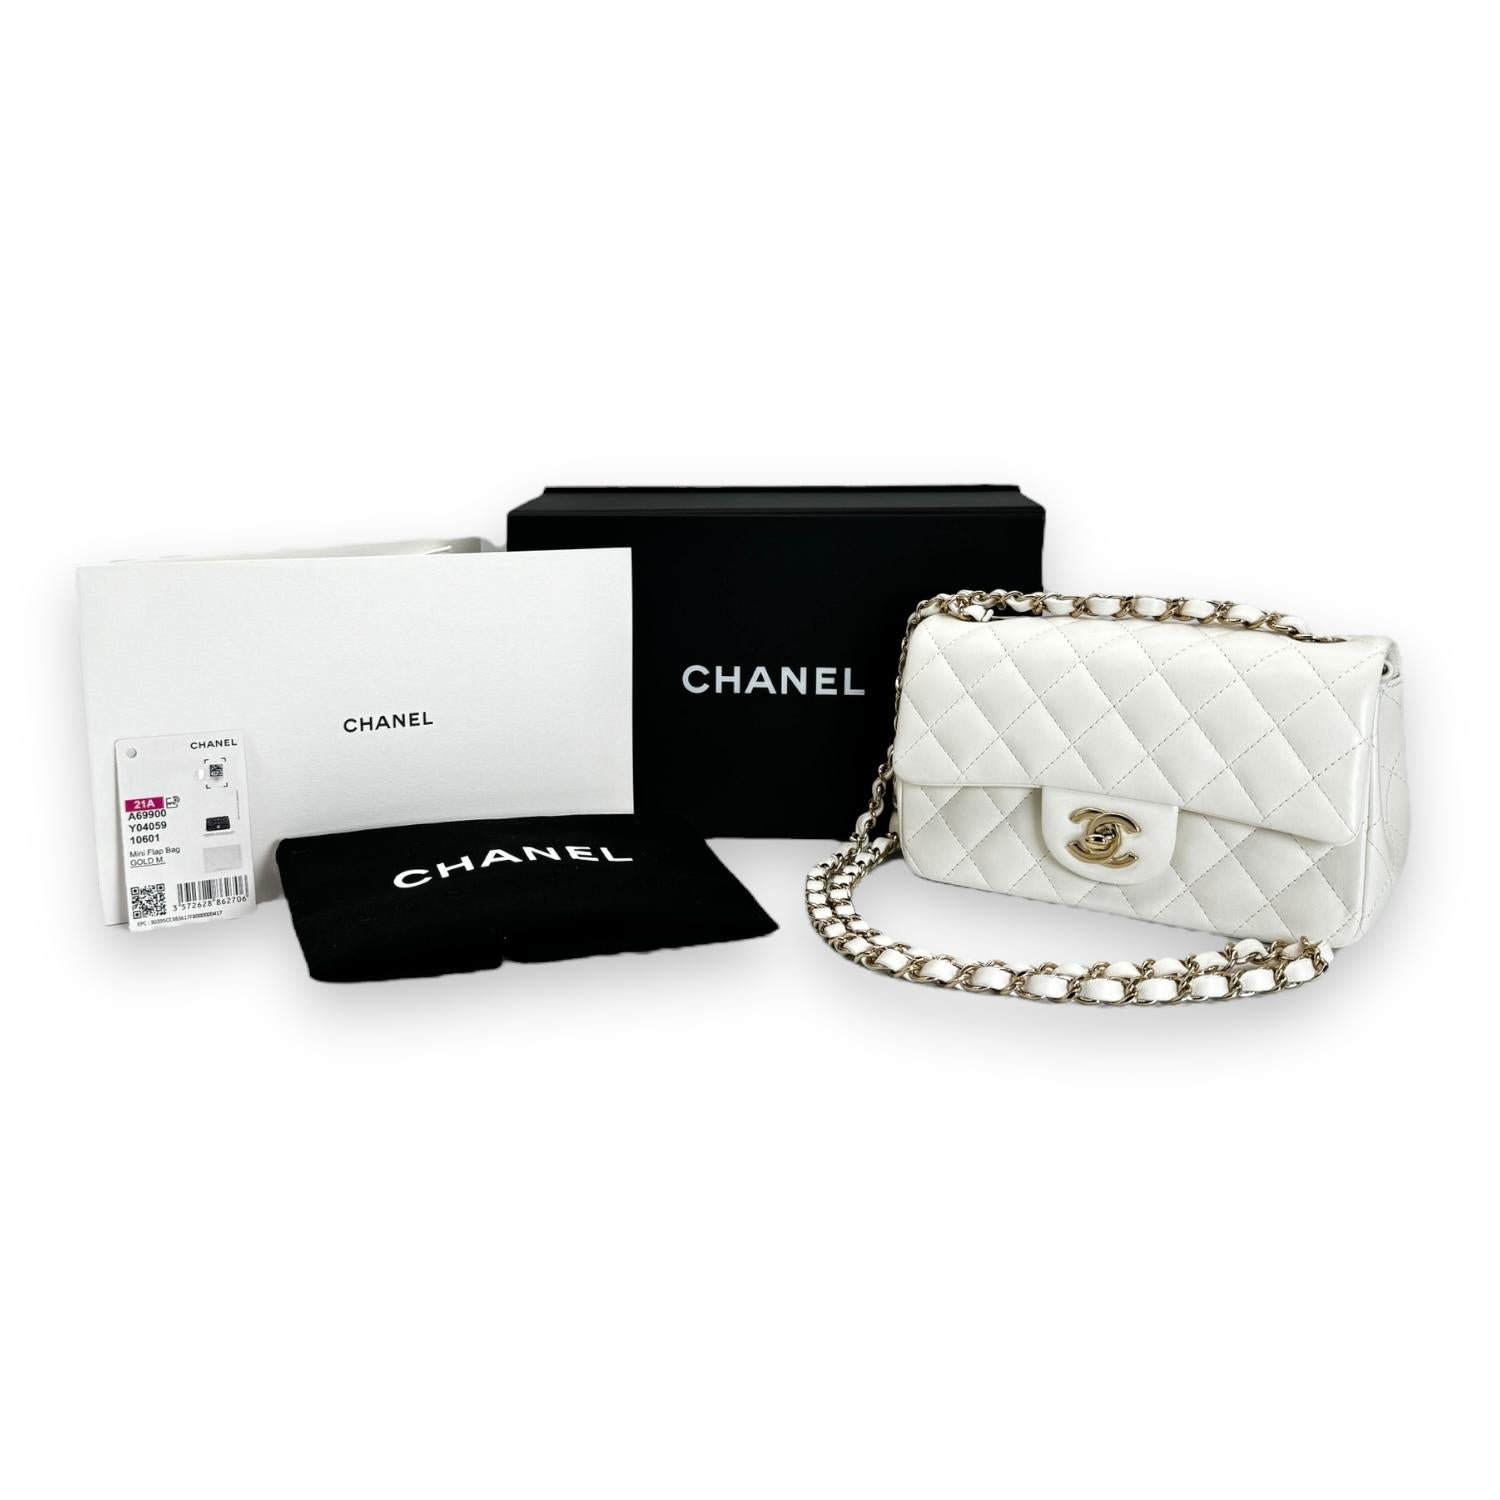 Chanel Quilted White Lambskin Mini Rectangular Classic Flap

Elevate your style with the exquisite Chanel Quilted White Lambskin Mini Rectangular Flap Bag. Exquisitely crafted from luxurious lambskin leather in Italy, this designer bag features the